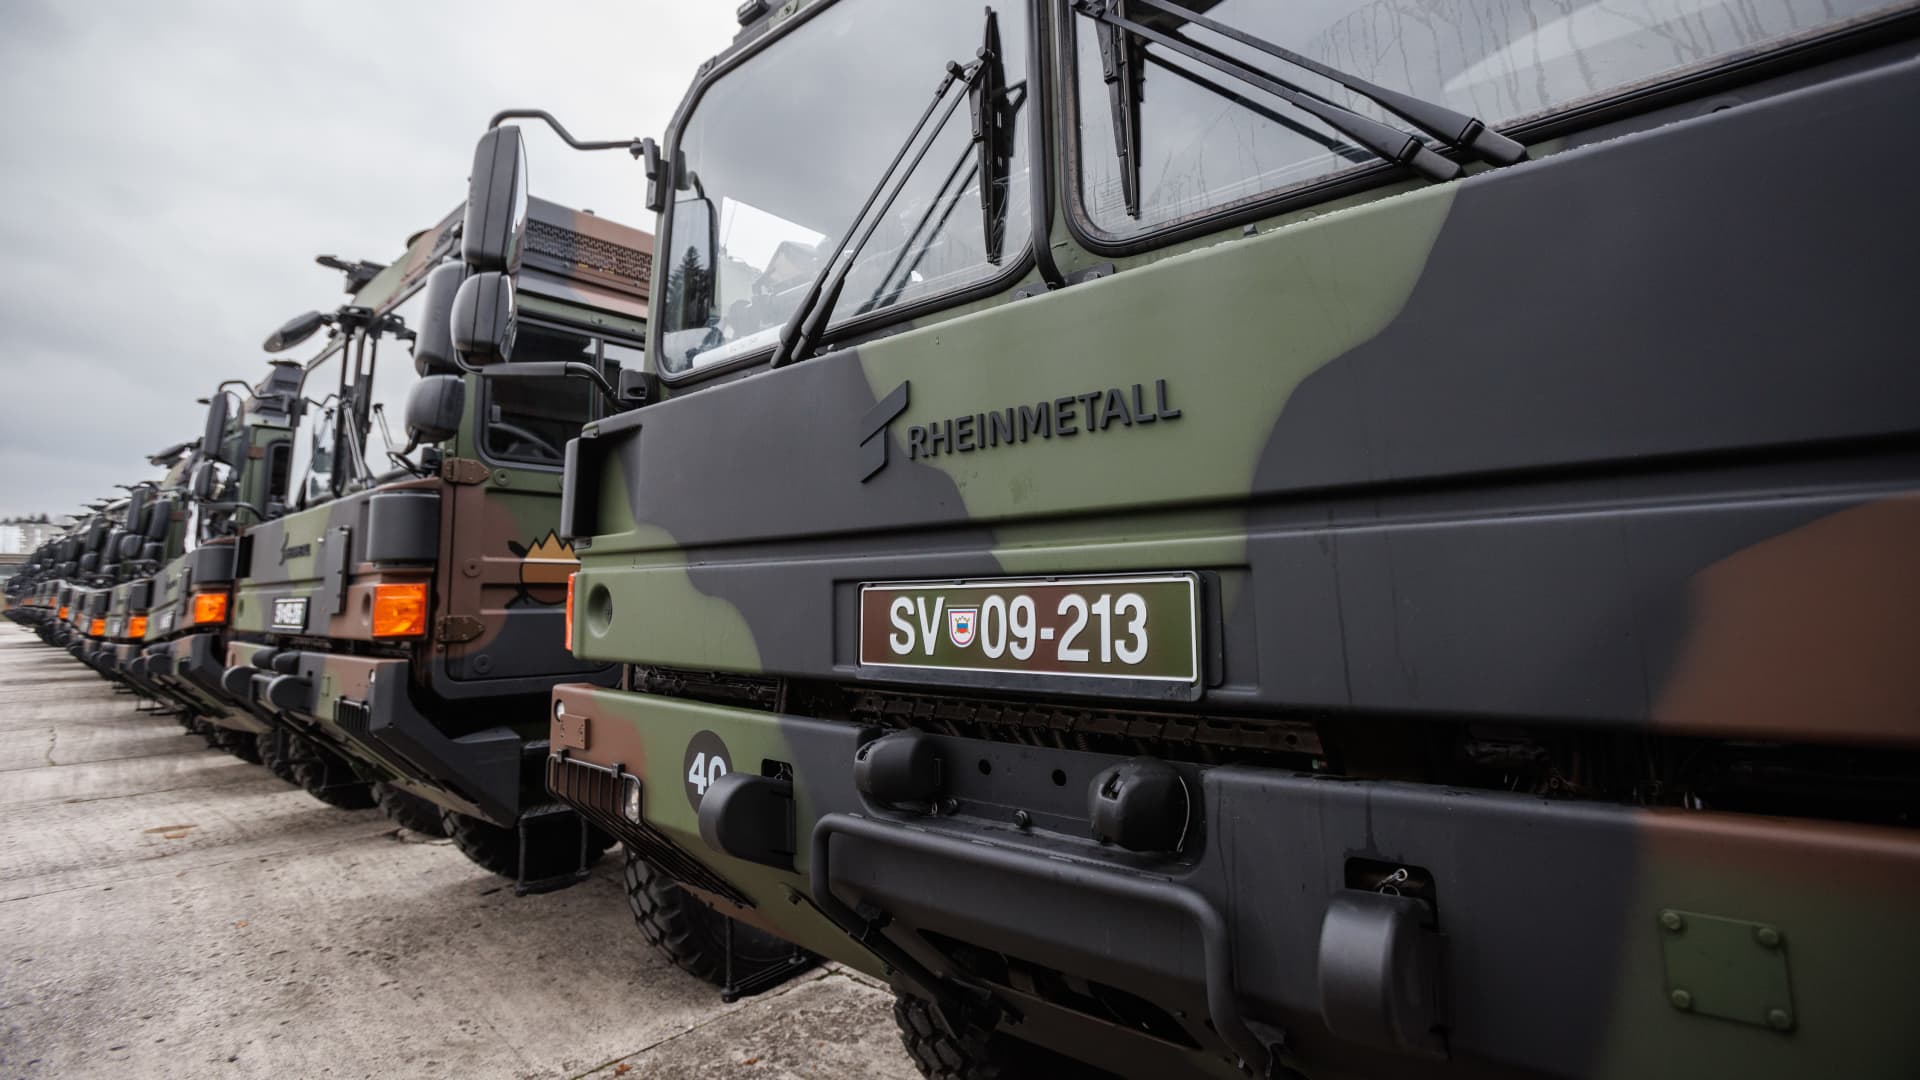 German Rheinmetall MAN tactical military transport vehicles are parked in the Edvard Peperko military barracks. Slovenian military received 40 of Rheinmetall trucks as part of a so-called chain-swap deal with Germany used to supply arms to Ukraine, in which Slovenia sent 28 M55s tanks to Ukraine and 38 Oshkosh vehicles after purchasing them from the USA.